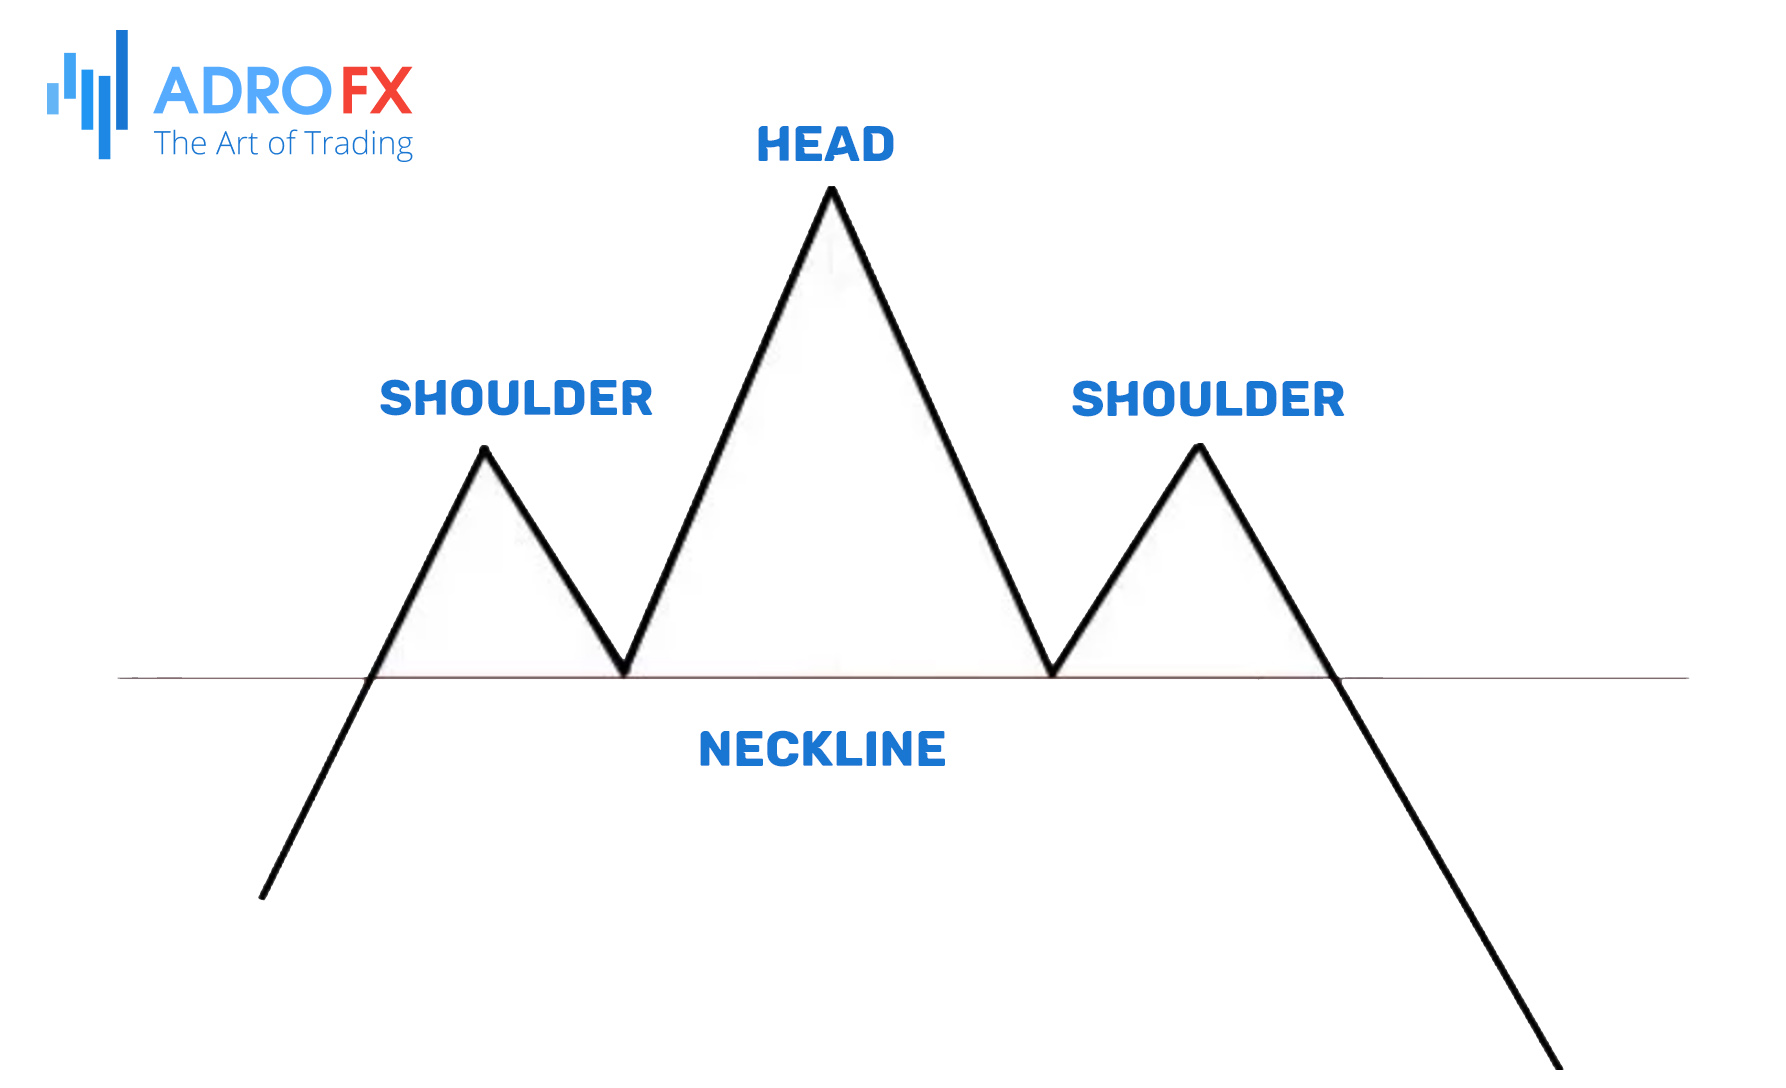 Head-and-Shoulders-pattern